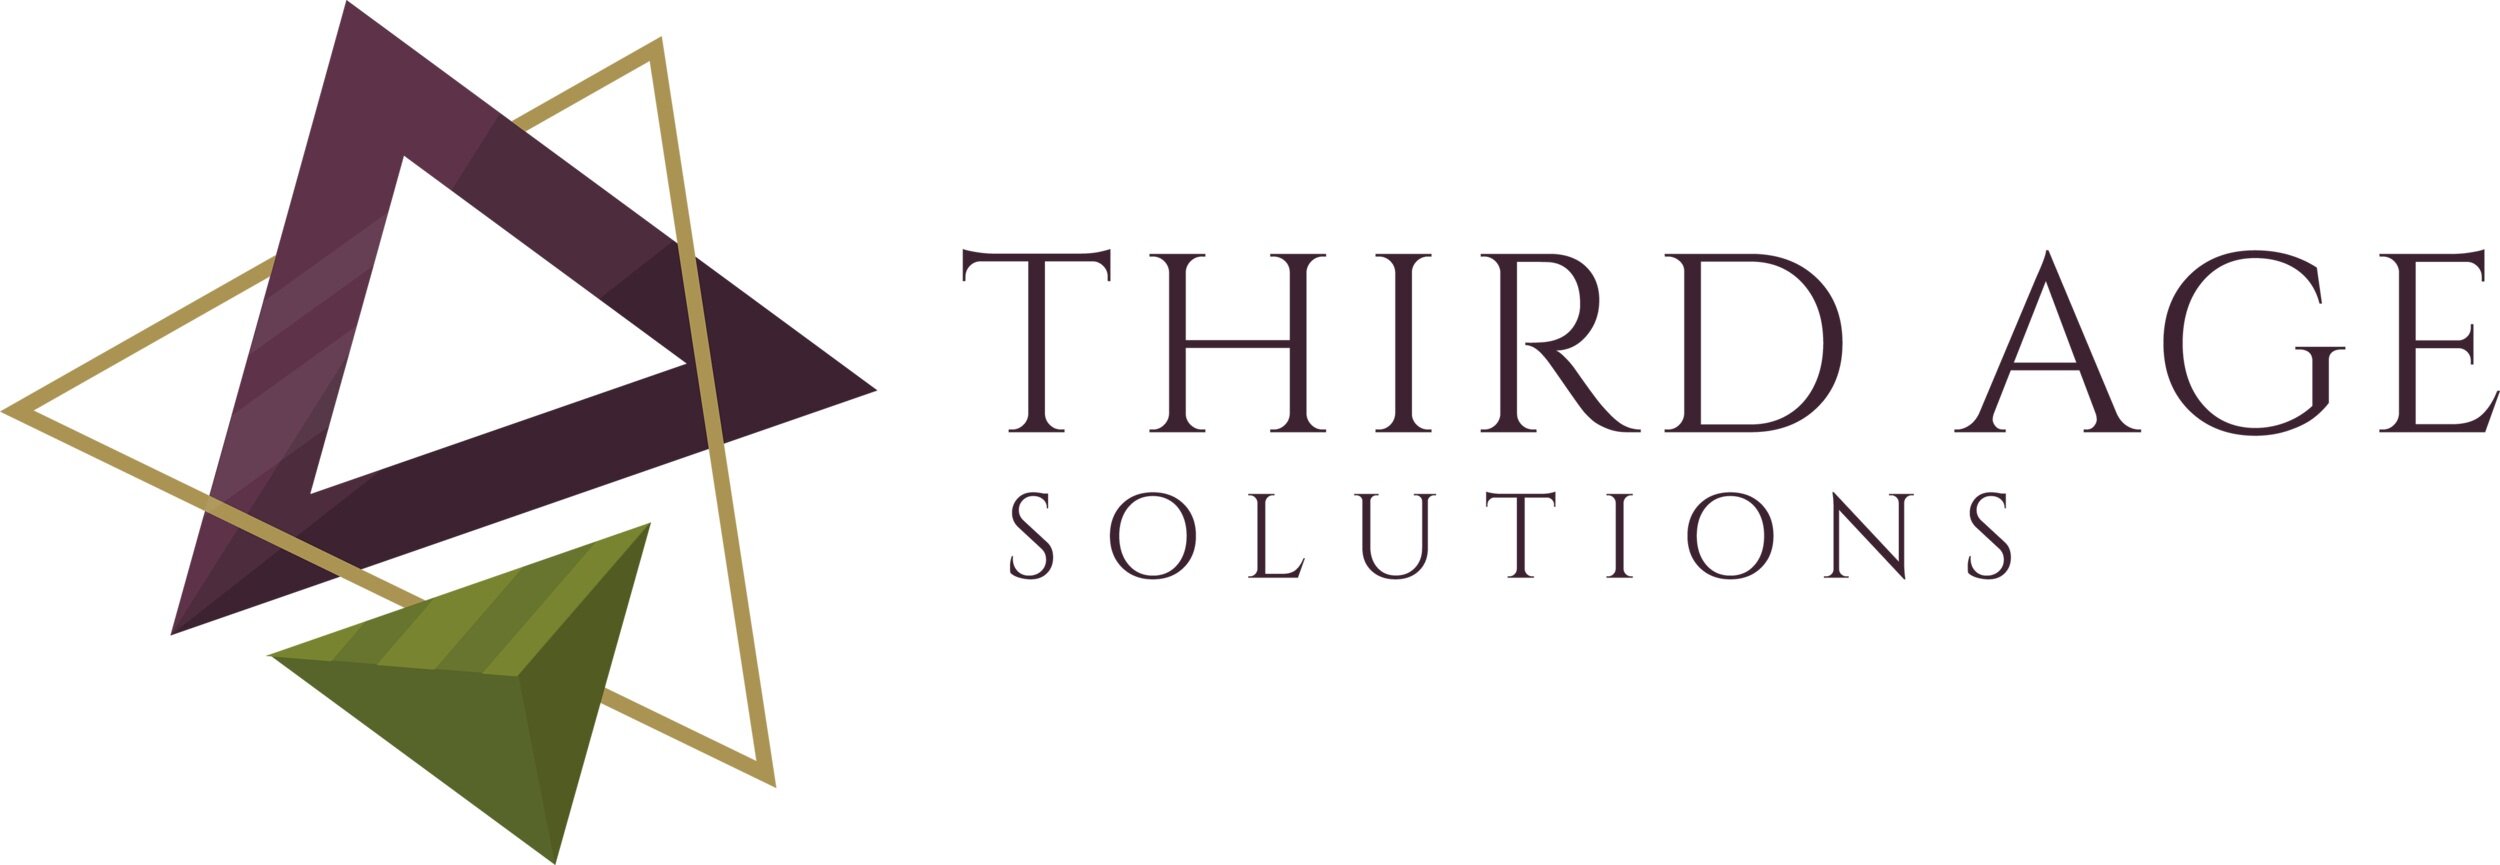 Third Age Solutions®